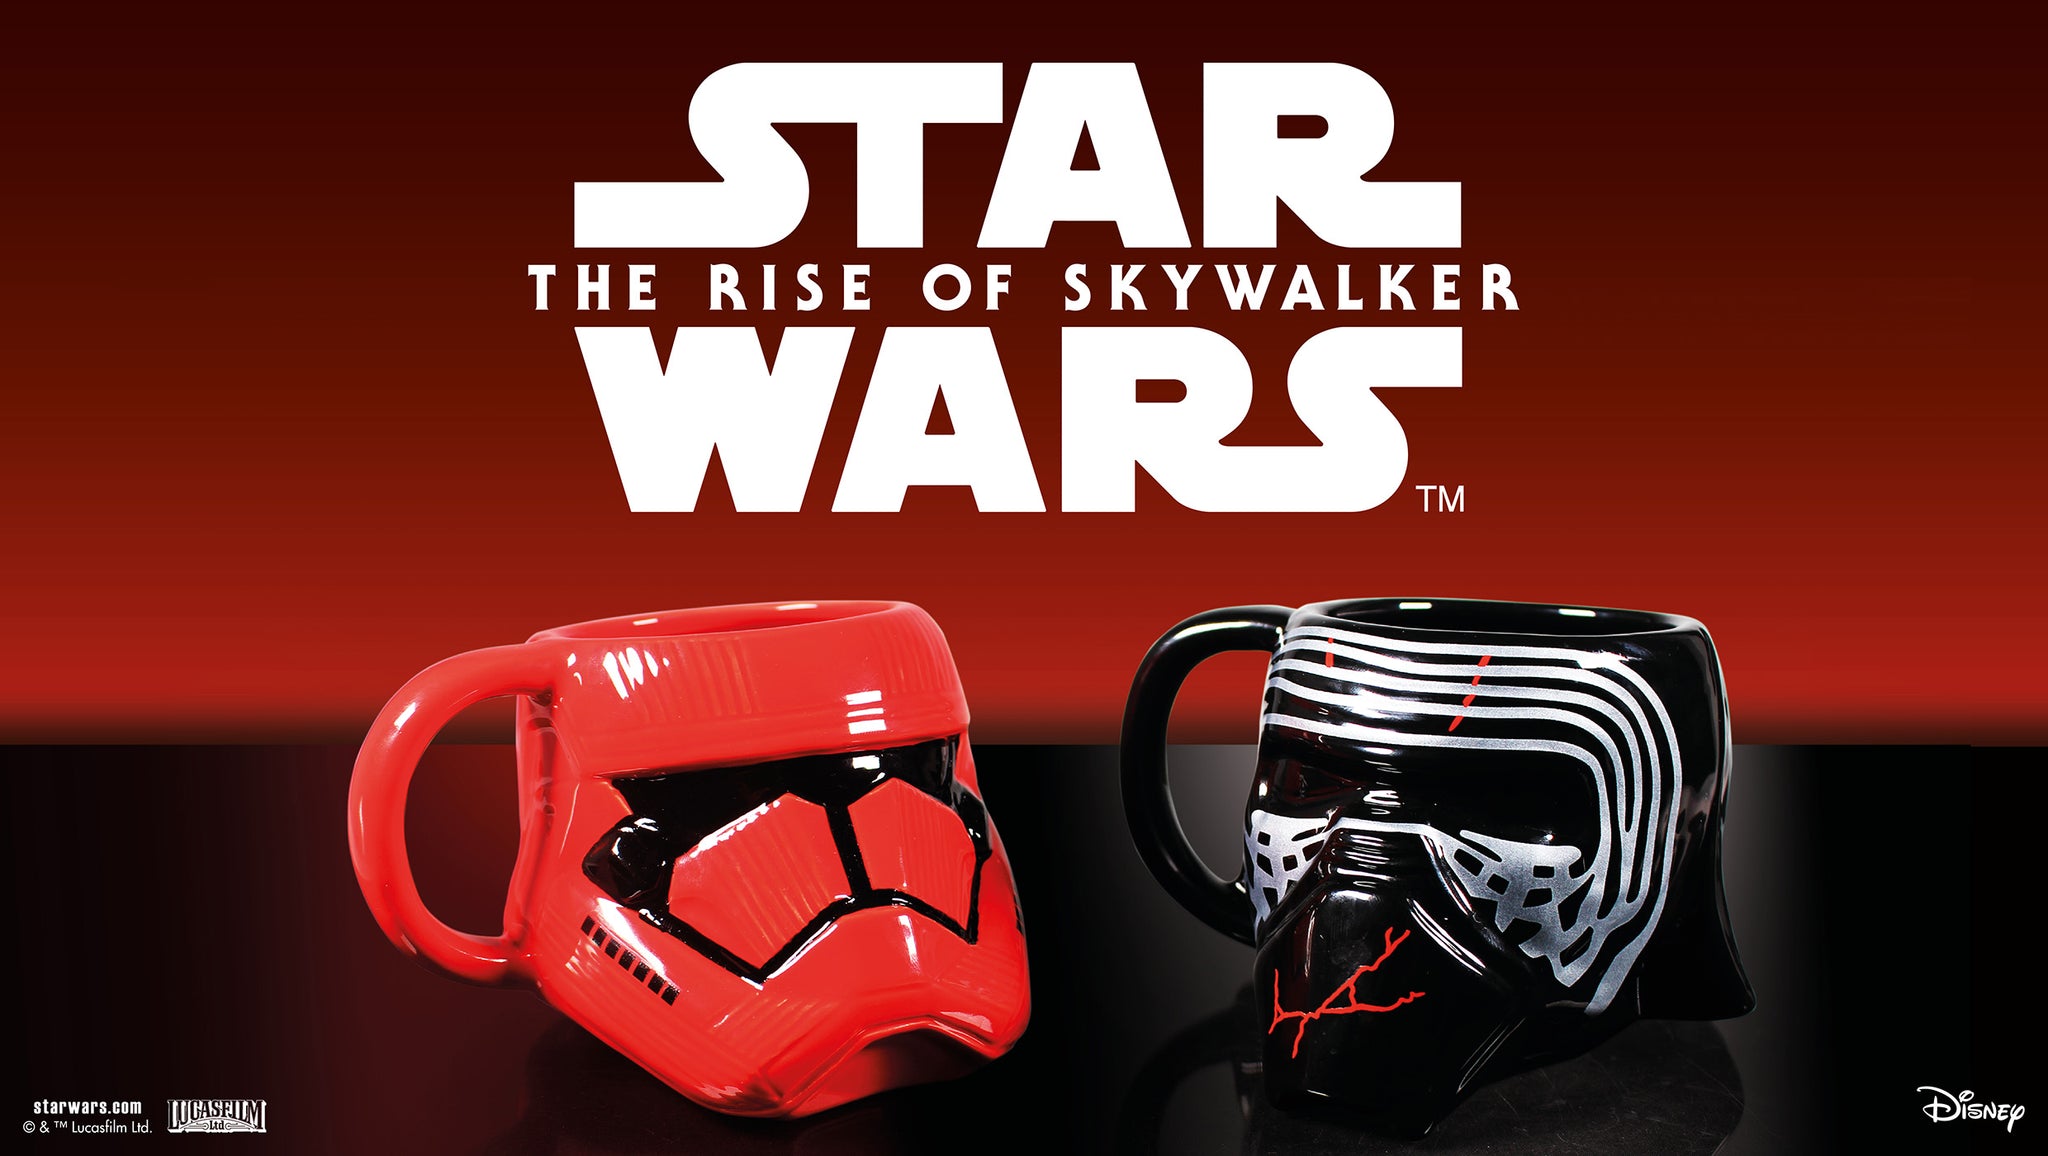 Half Moon Bay's Star Wars: The Rise of Skywalker Products Revealed!